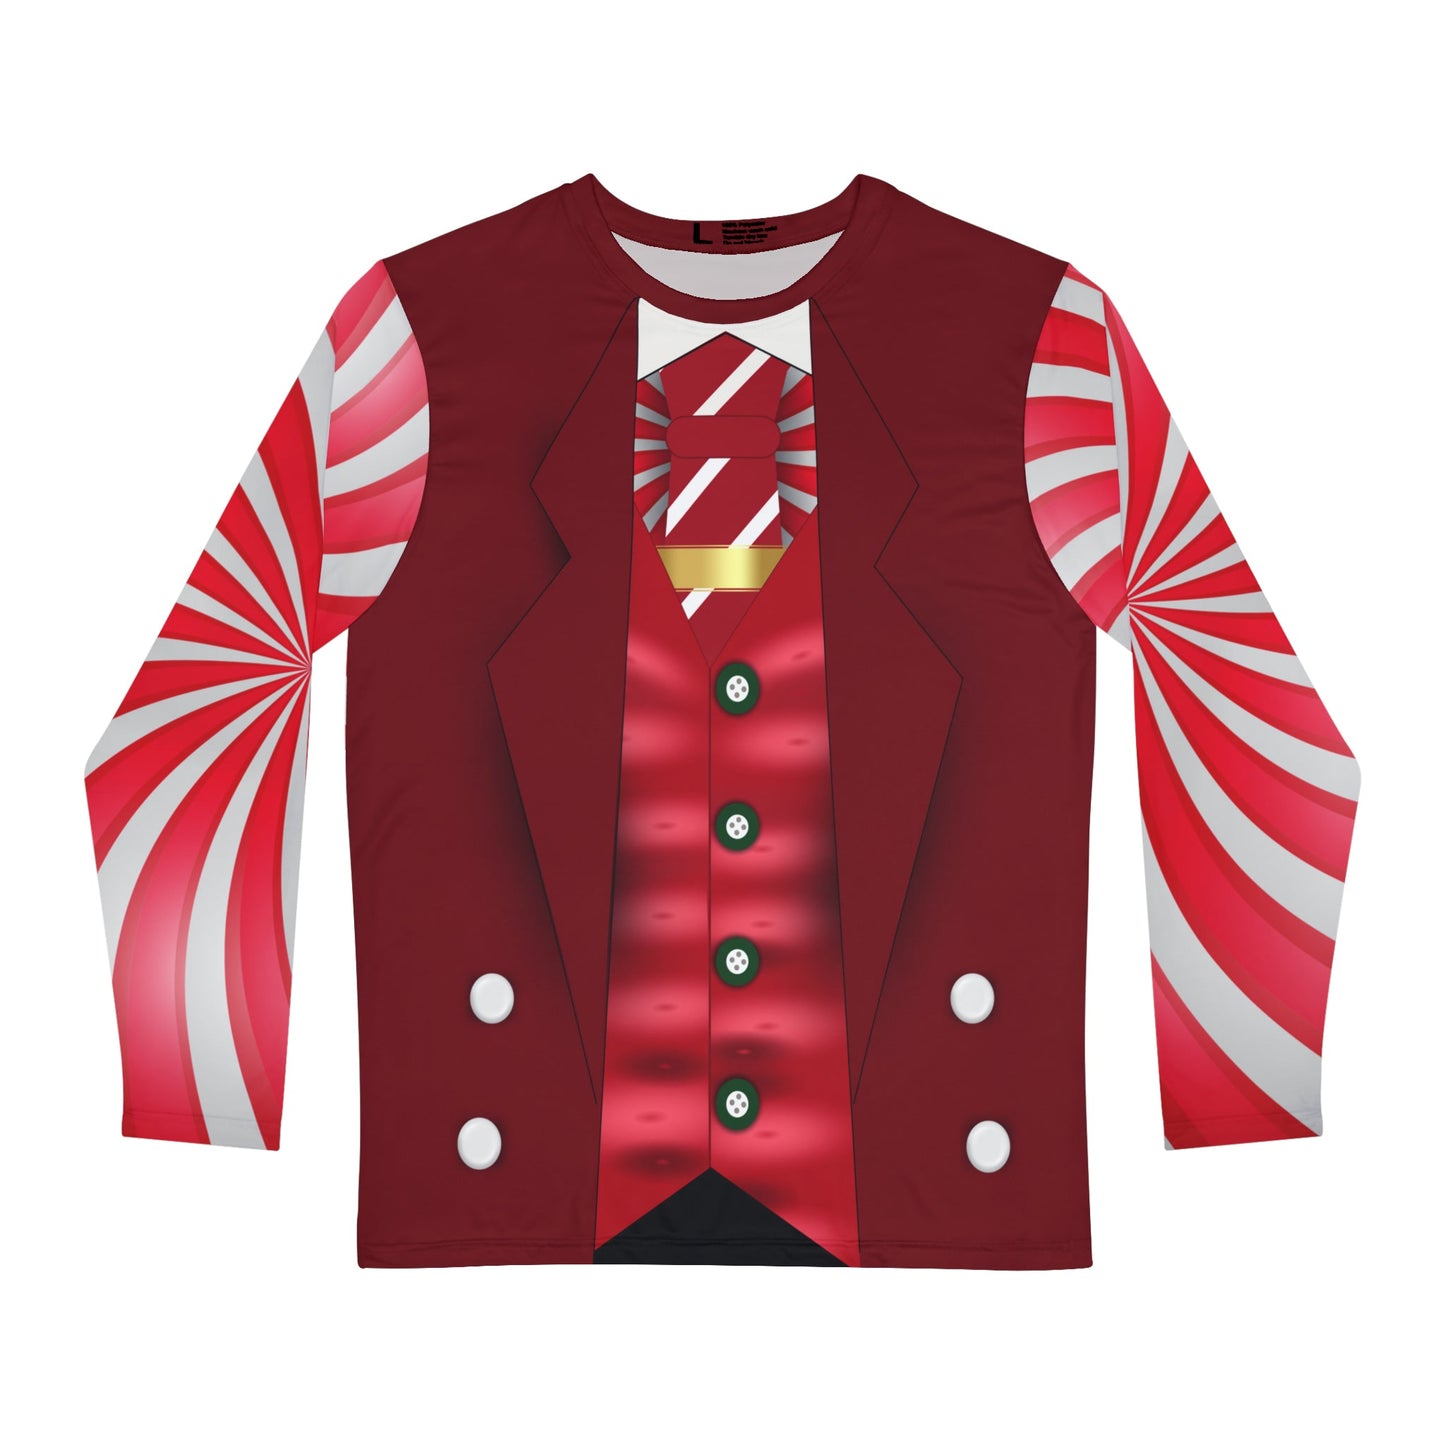 Peppermint Suit Unisex Long Sleeve Shirt All Over PrintAOPAOP Clothing#tag4##tag5##tag6#